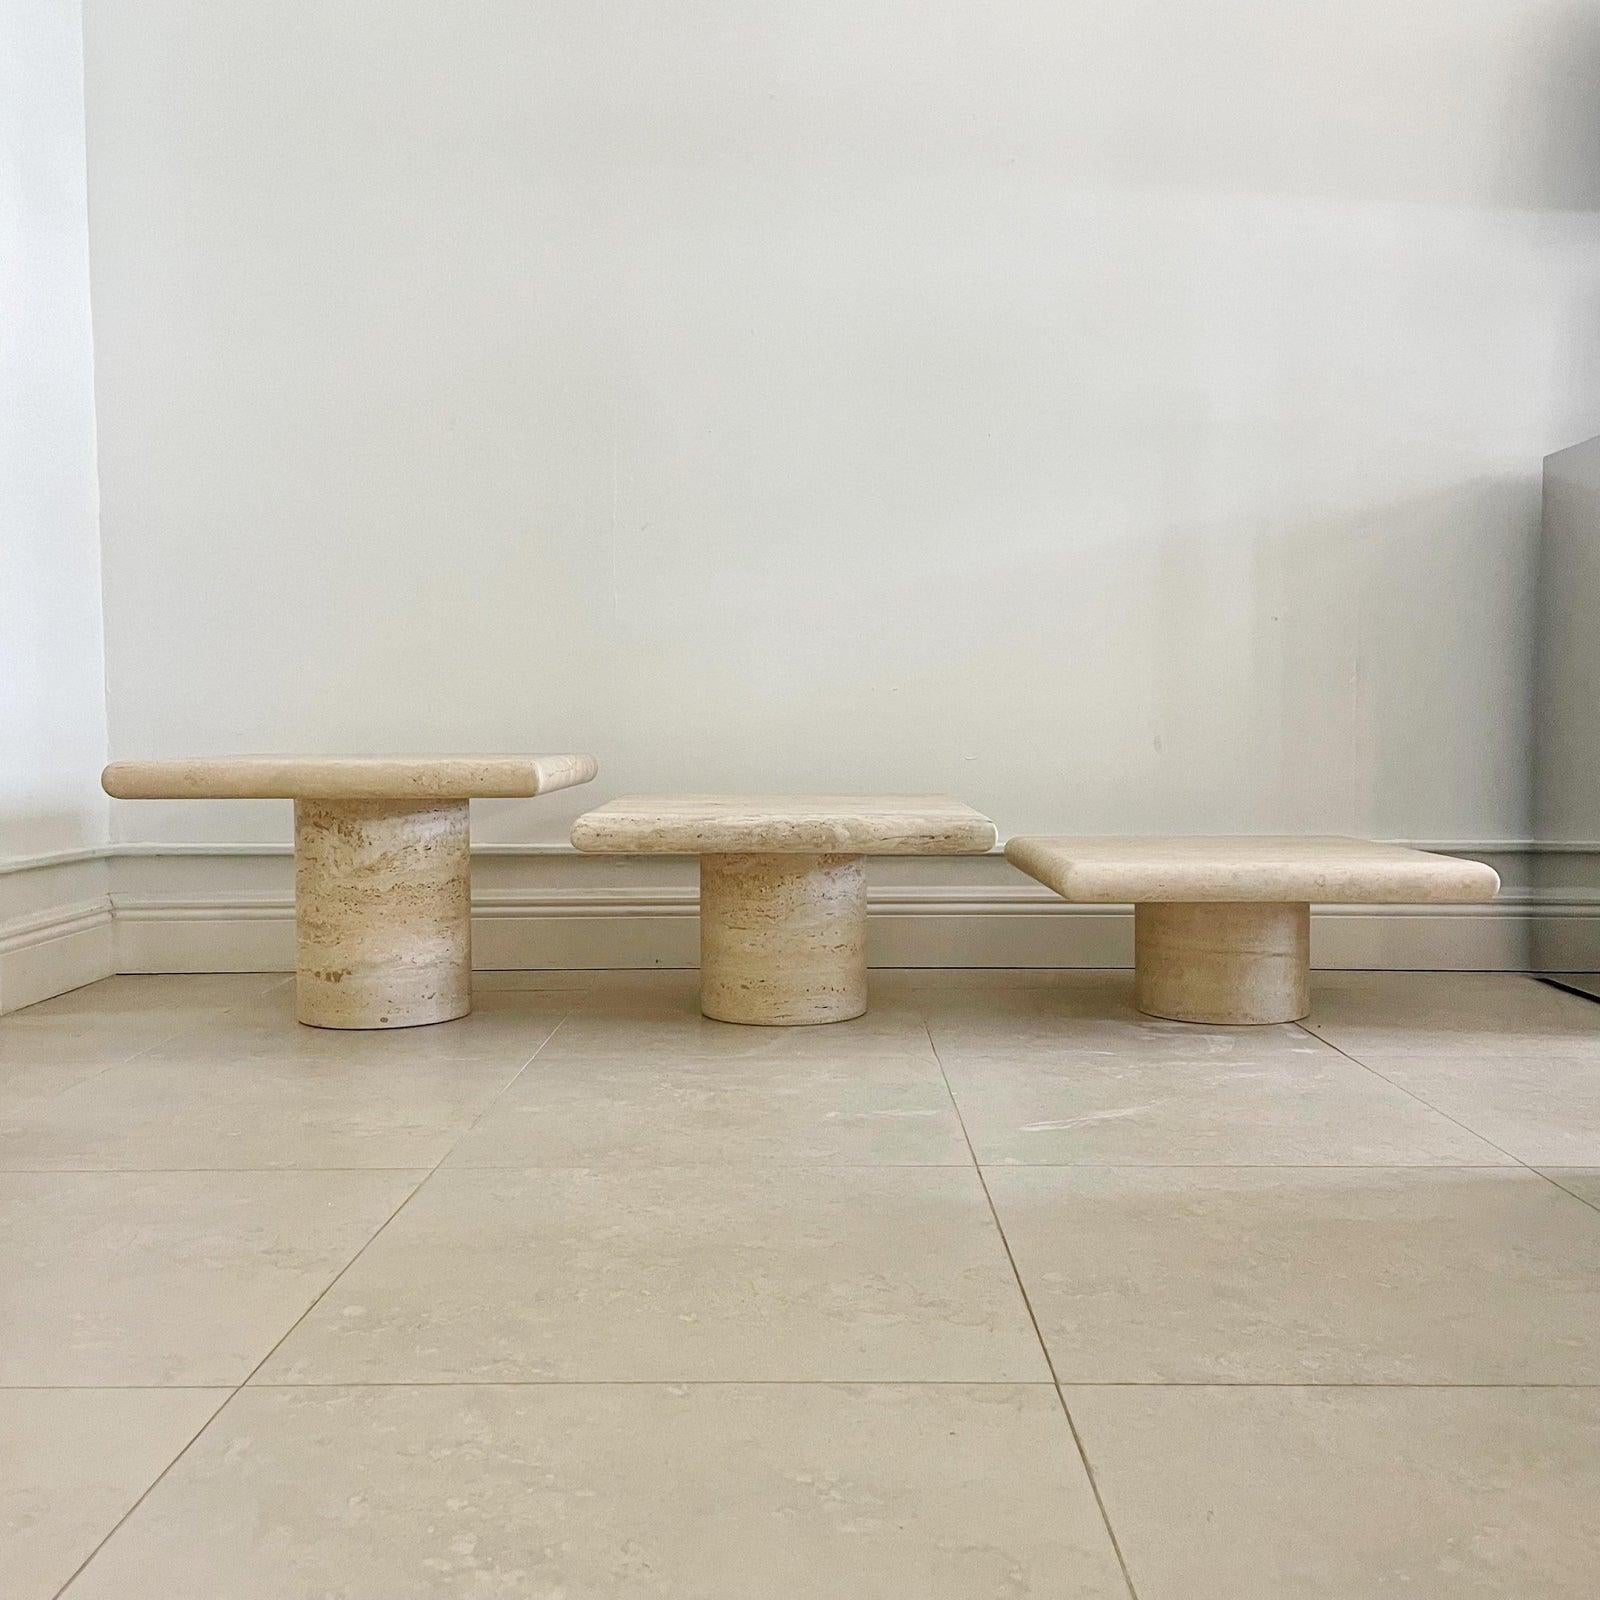 Set of three nesting tables in graduating sizes by Up & Up, Italy. Each one having a square top and cylindrical base in travertine. 
Measurements: Small Table 21.25